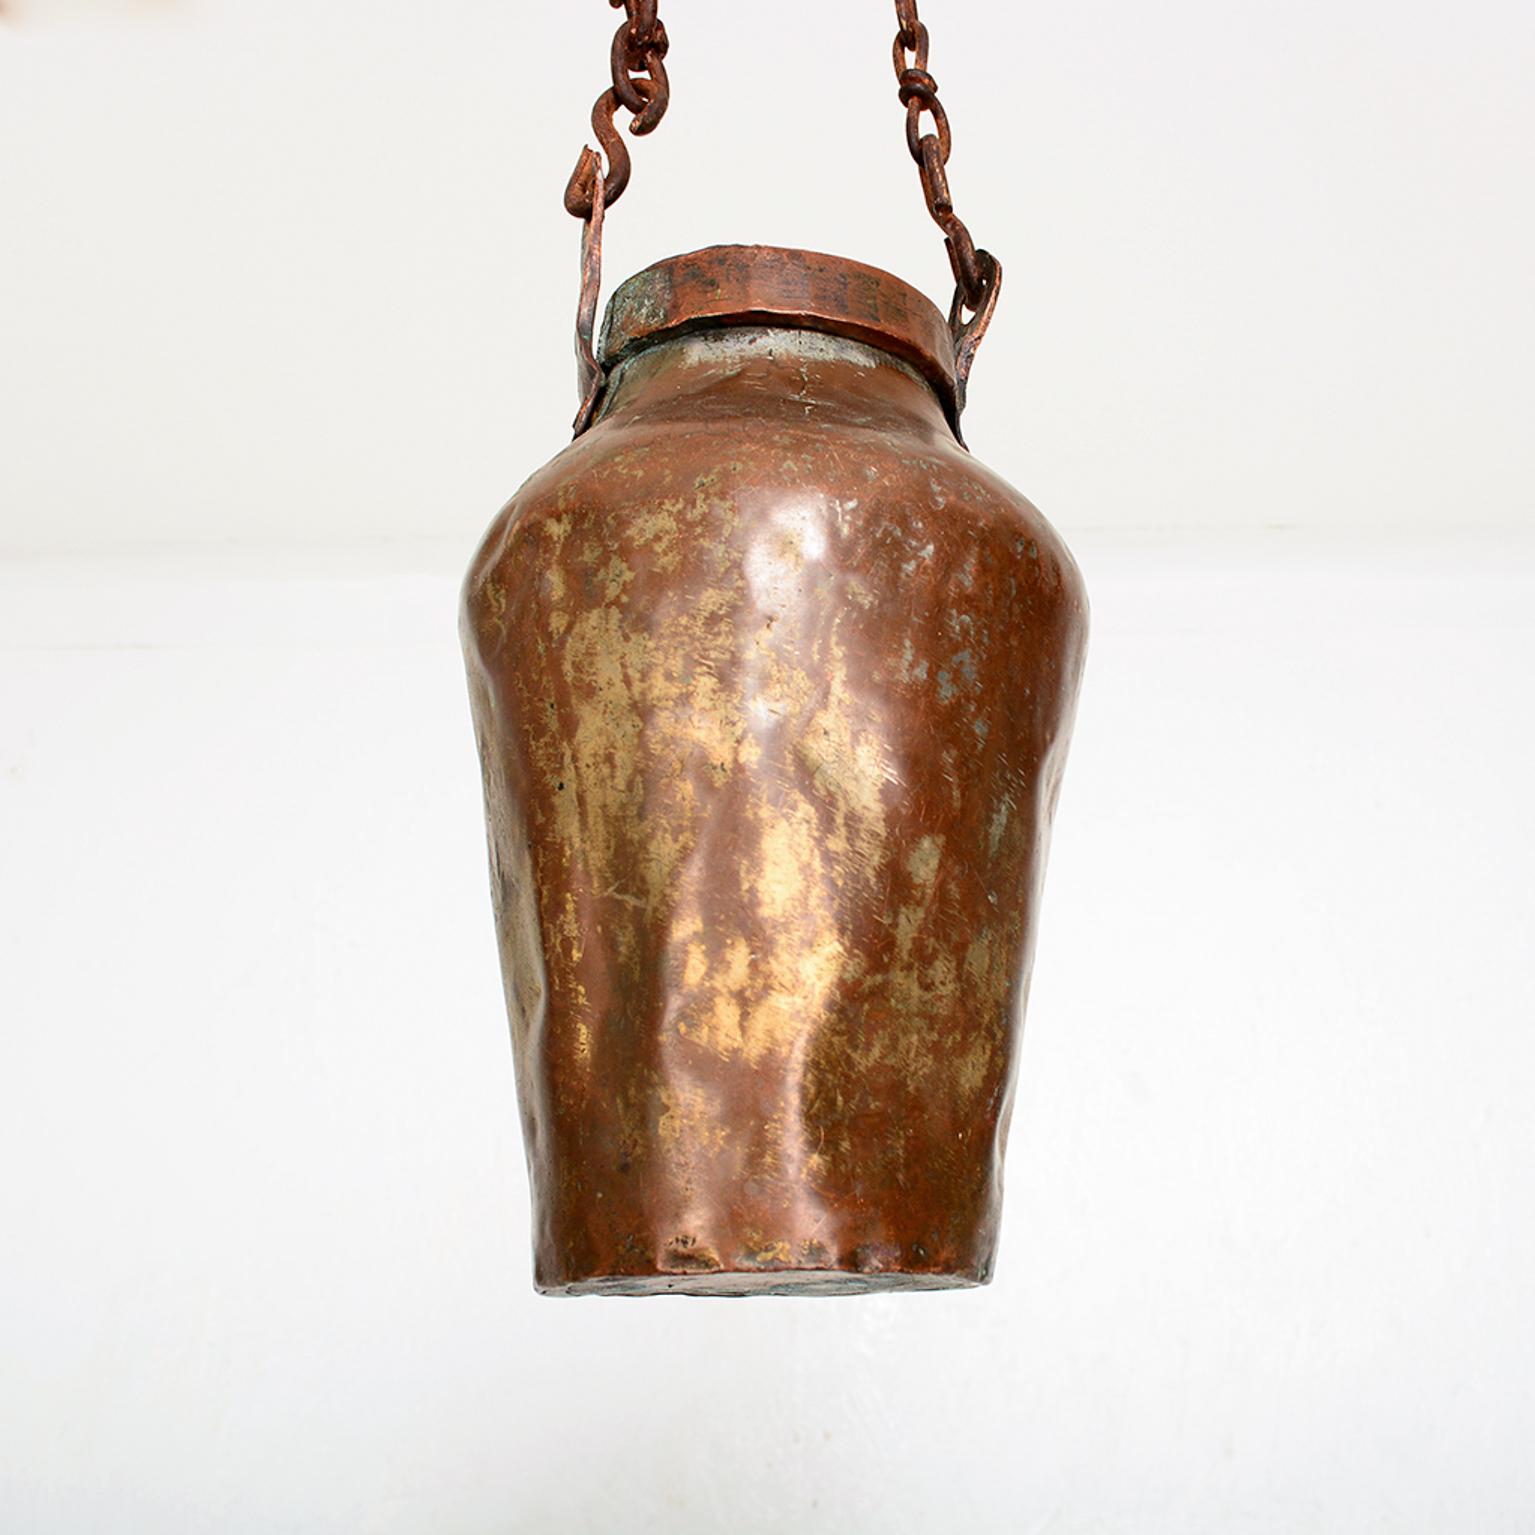 French Antique Hanging Vase Vessel Planter in Hammered Copper & Brass with Thick Heavy Chain
Maker Unknown. circa 1800s
Measures: 12 H x 6 in diameter with chain 25 total
Original Unrestored Vintage Antique Condition.
See images provided.

  
   